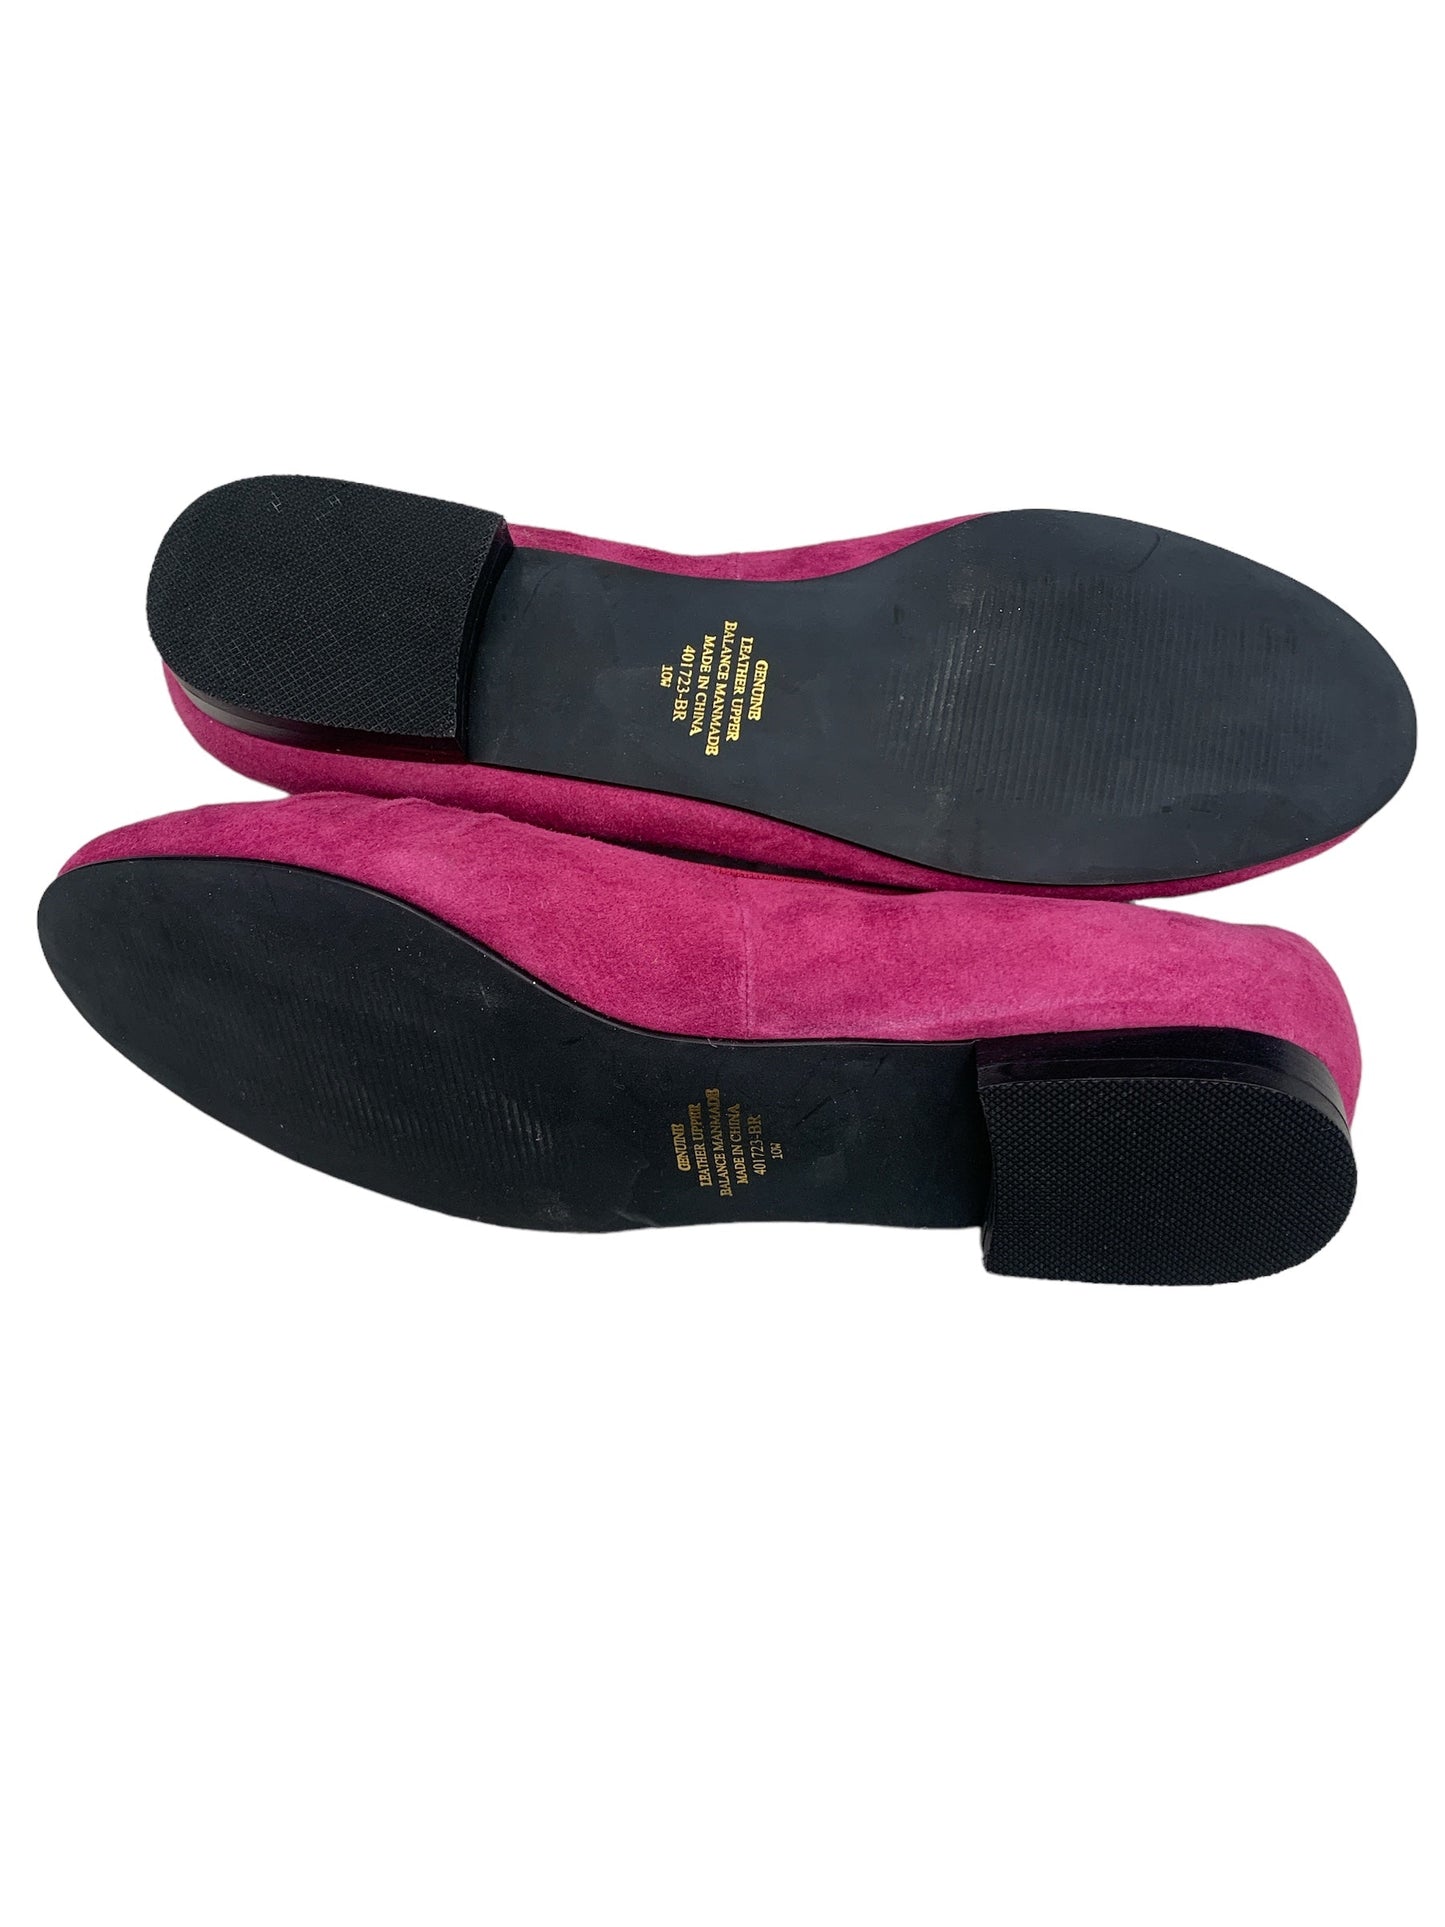 Shoes Flats Ballet By Silhouttes  Size: 10